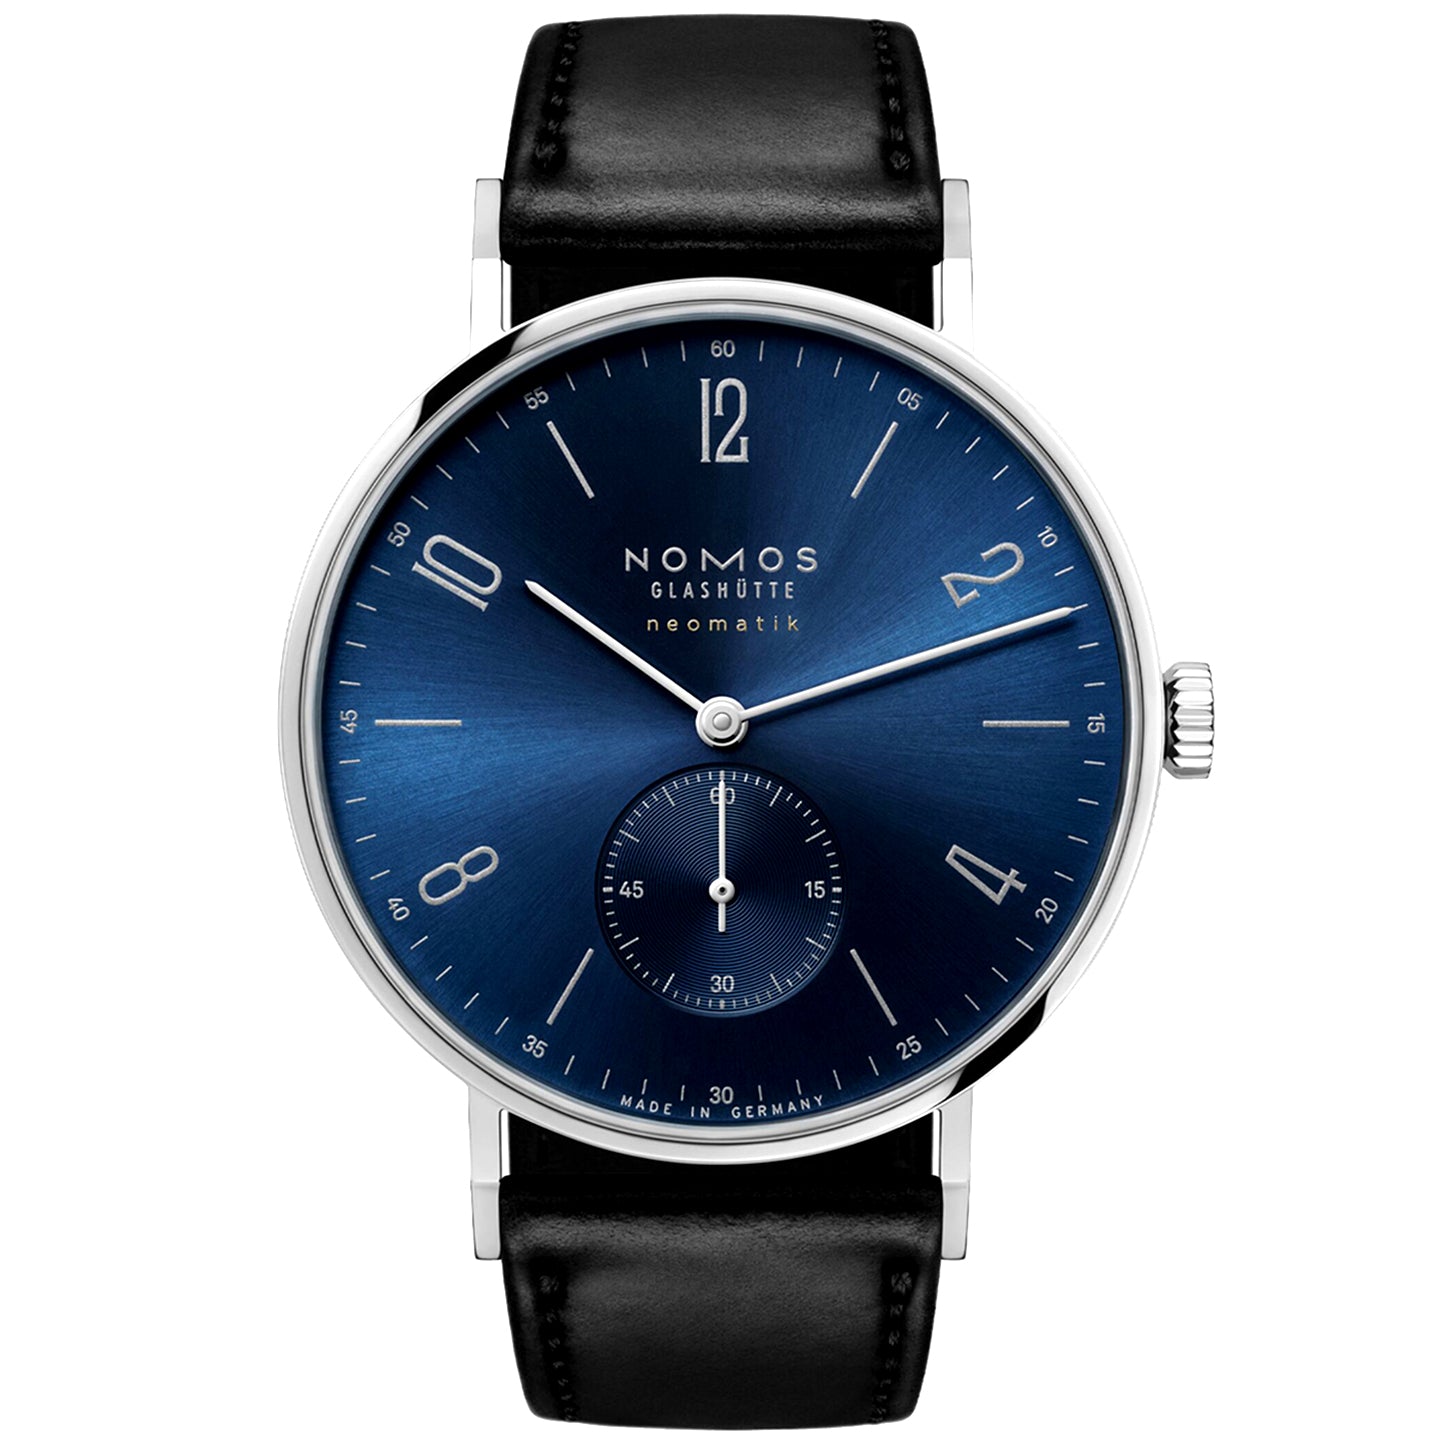 Tangente Neomatik 39mm Blue Gold Dial Automatic Watch